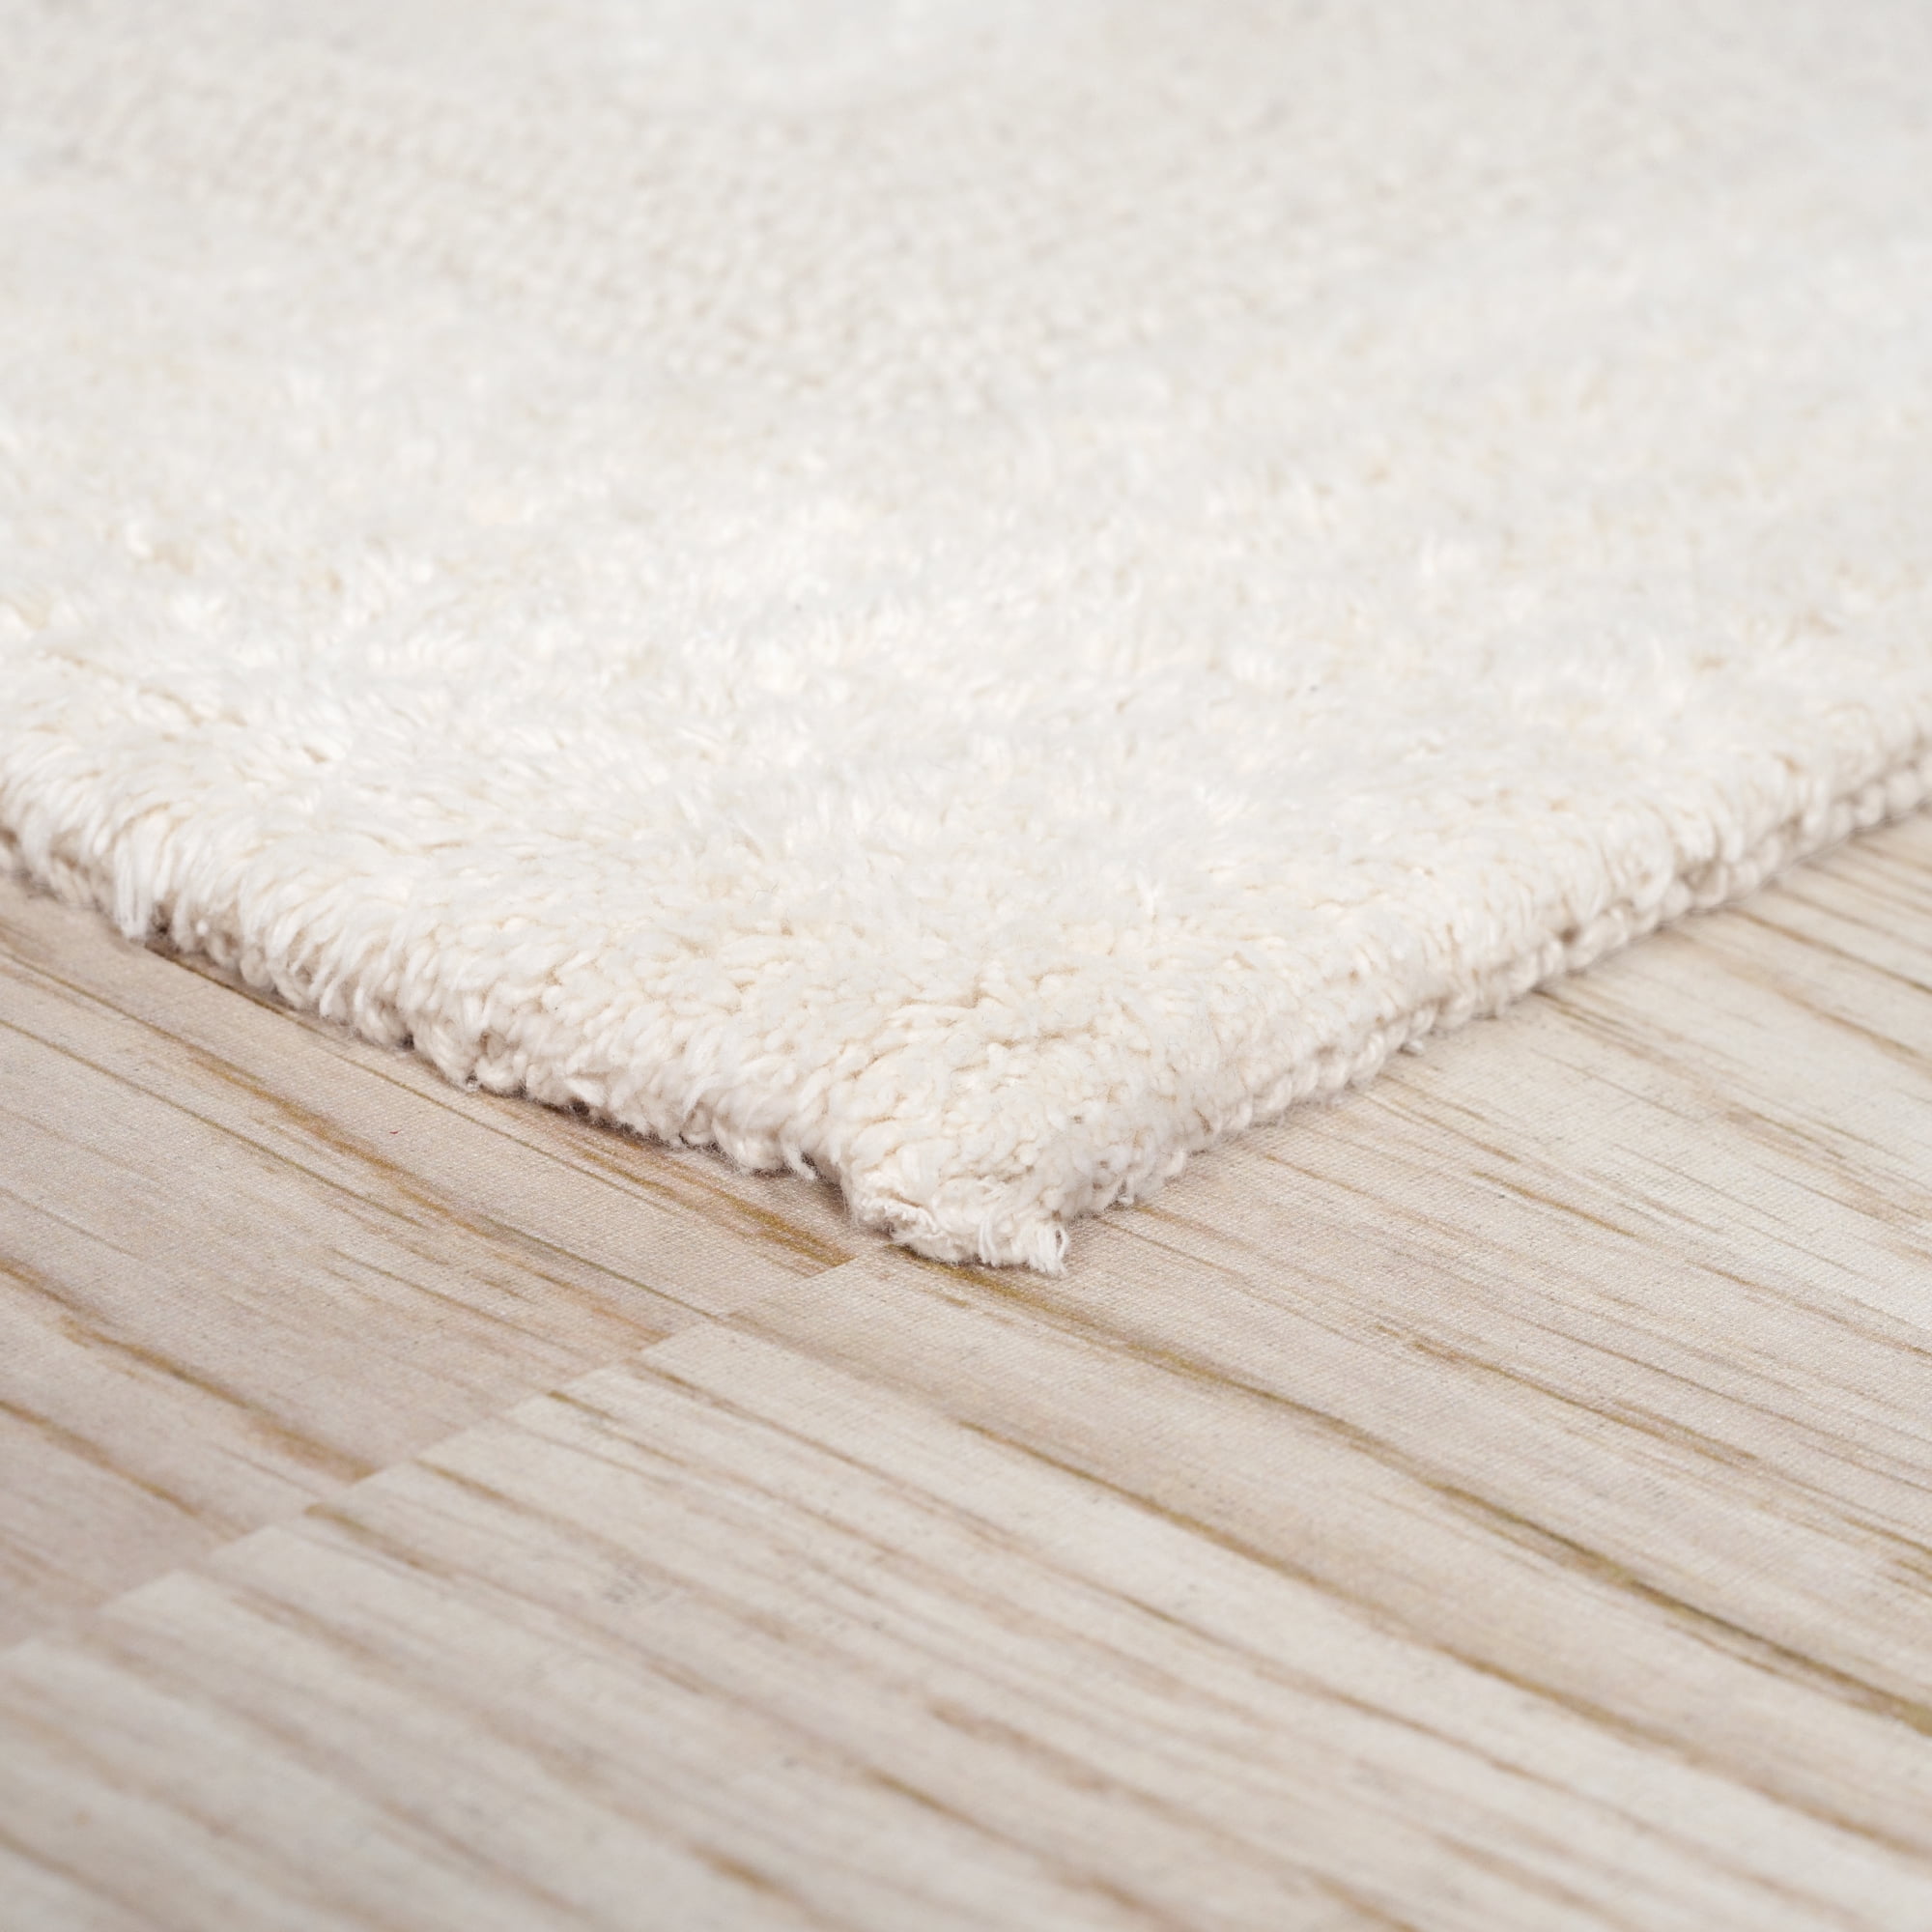 Cotton Bath Mat- Plush 100 Percent Cotton 24x60 Long Bathroom Runner-  Reversible, Soft, Absorbent, and Machine Washable Rug by Lavish Home  (Ivory)